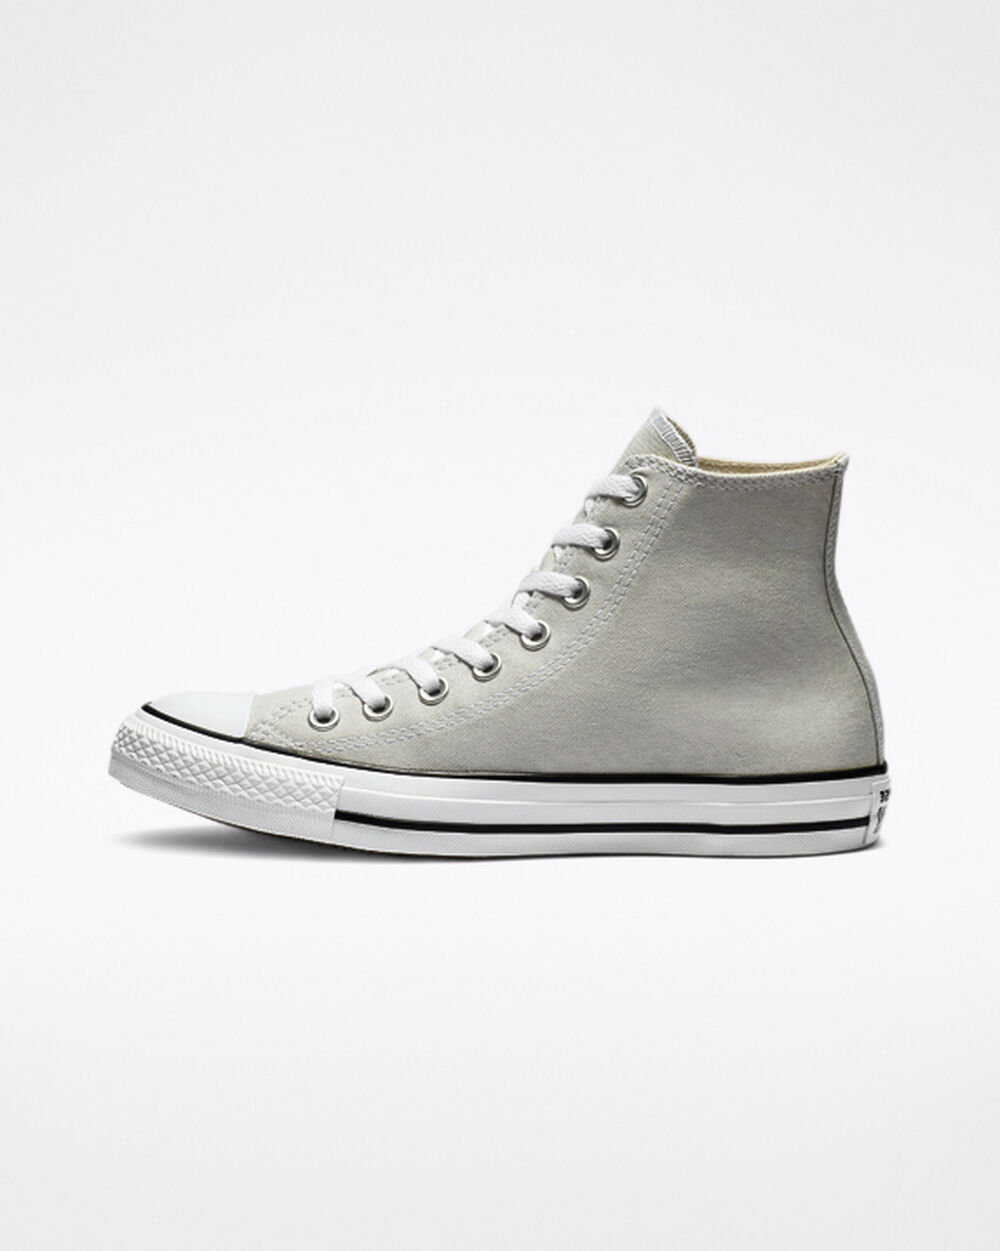 Tenis Converse Chuck Taylor All Star Mujer Grises Claro | Mexico-067636